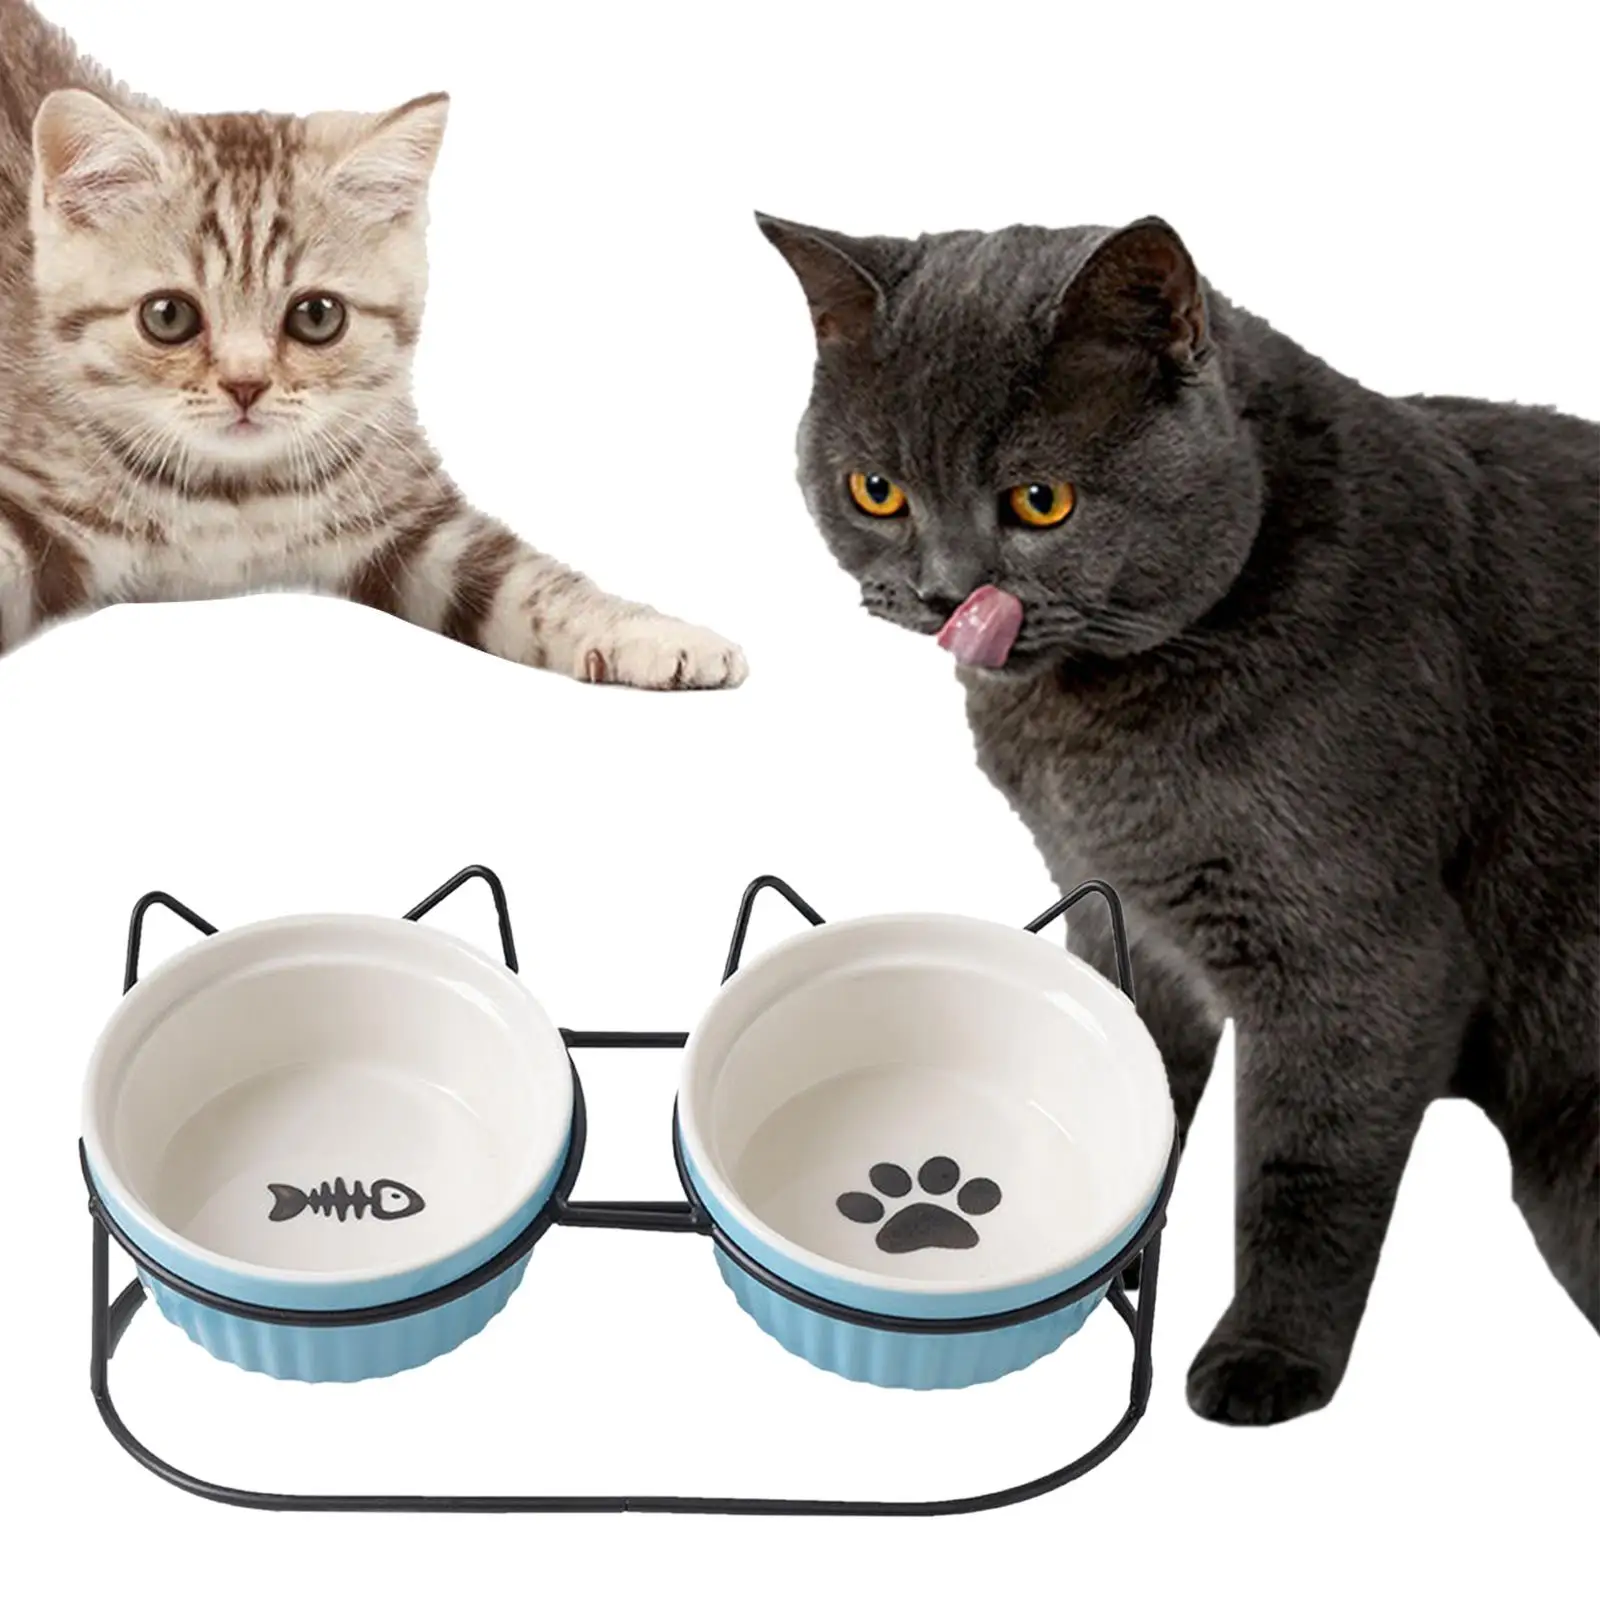 Cat Bowls Raised Stand Neck Guard Stand Iron Elevated Stand for Cat Dog Bowl Cat Food Water Bowls